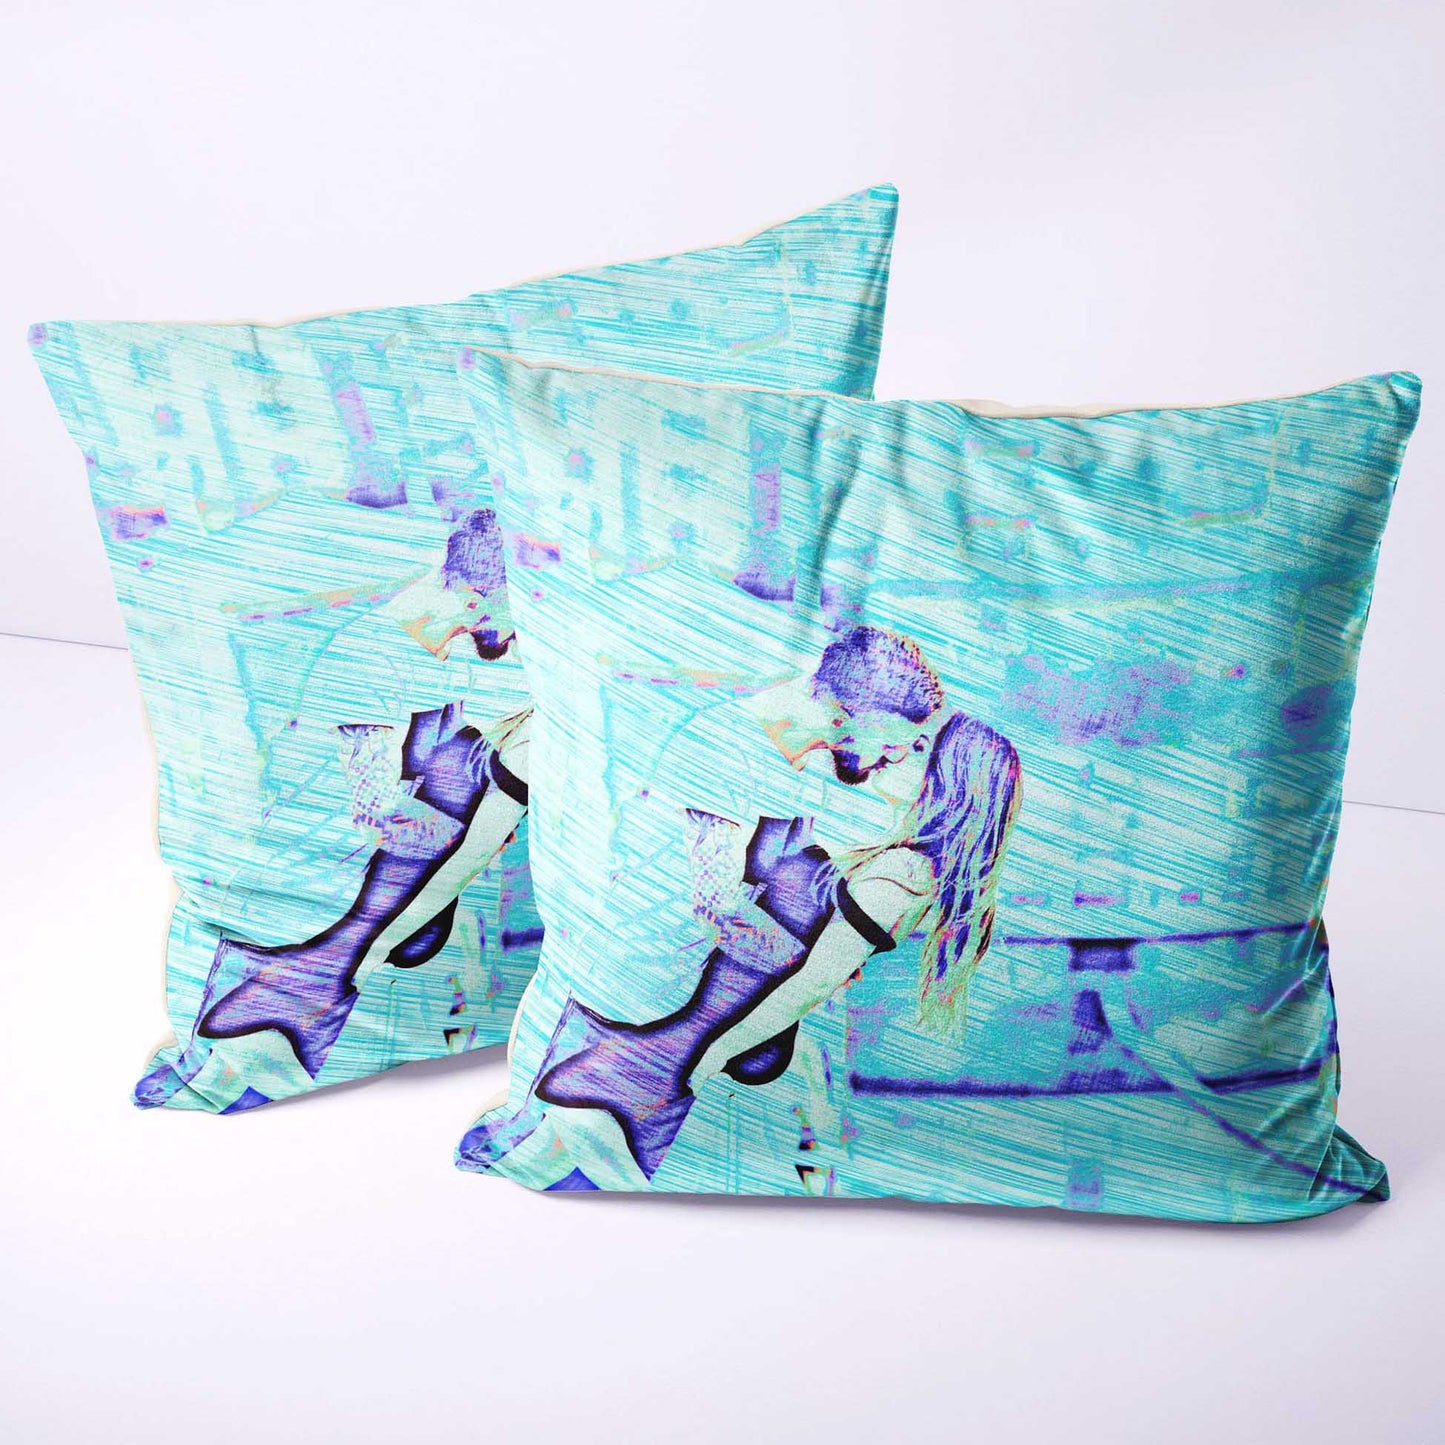 The Personalised Blue Drawing Cushion is the perfect blend of luxury and creativity for your home decor. With its custom drawing created from your photo, it showcases a unique and imaginative design. Made from soft velvet fabric